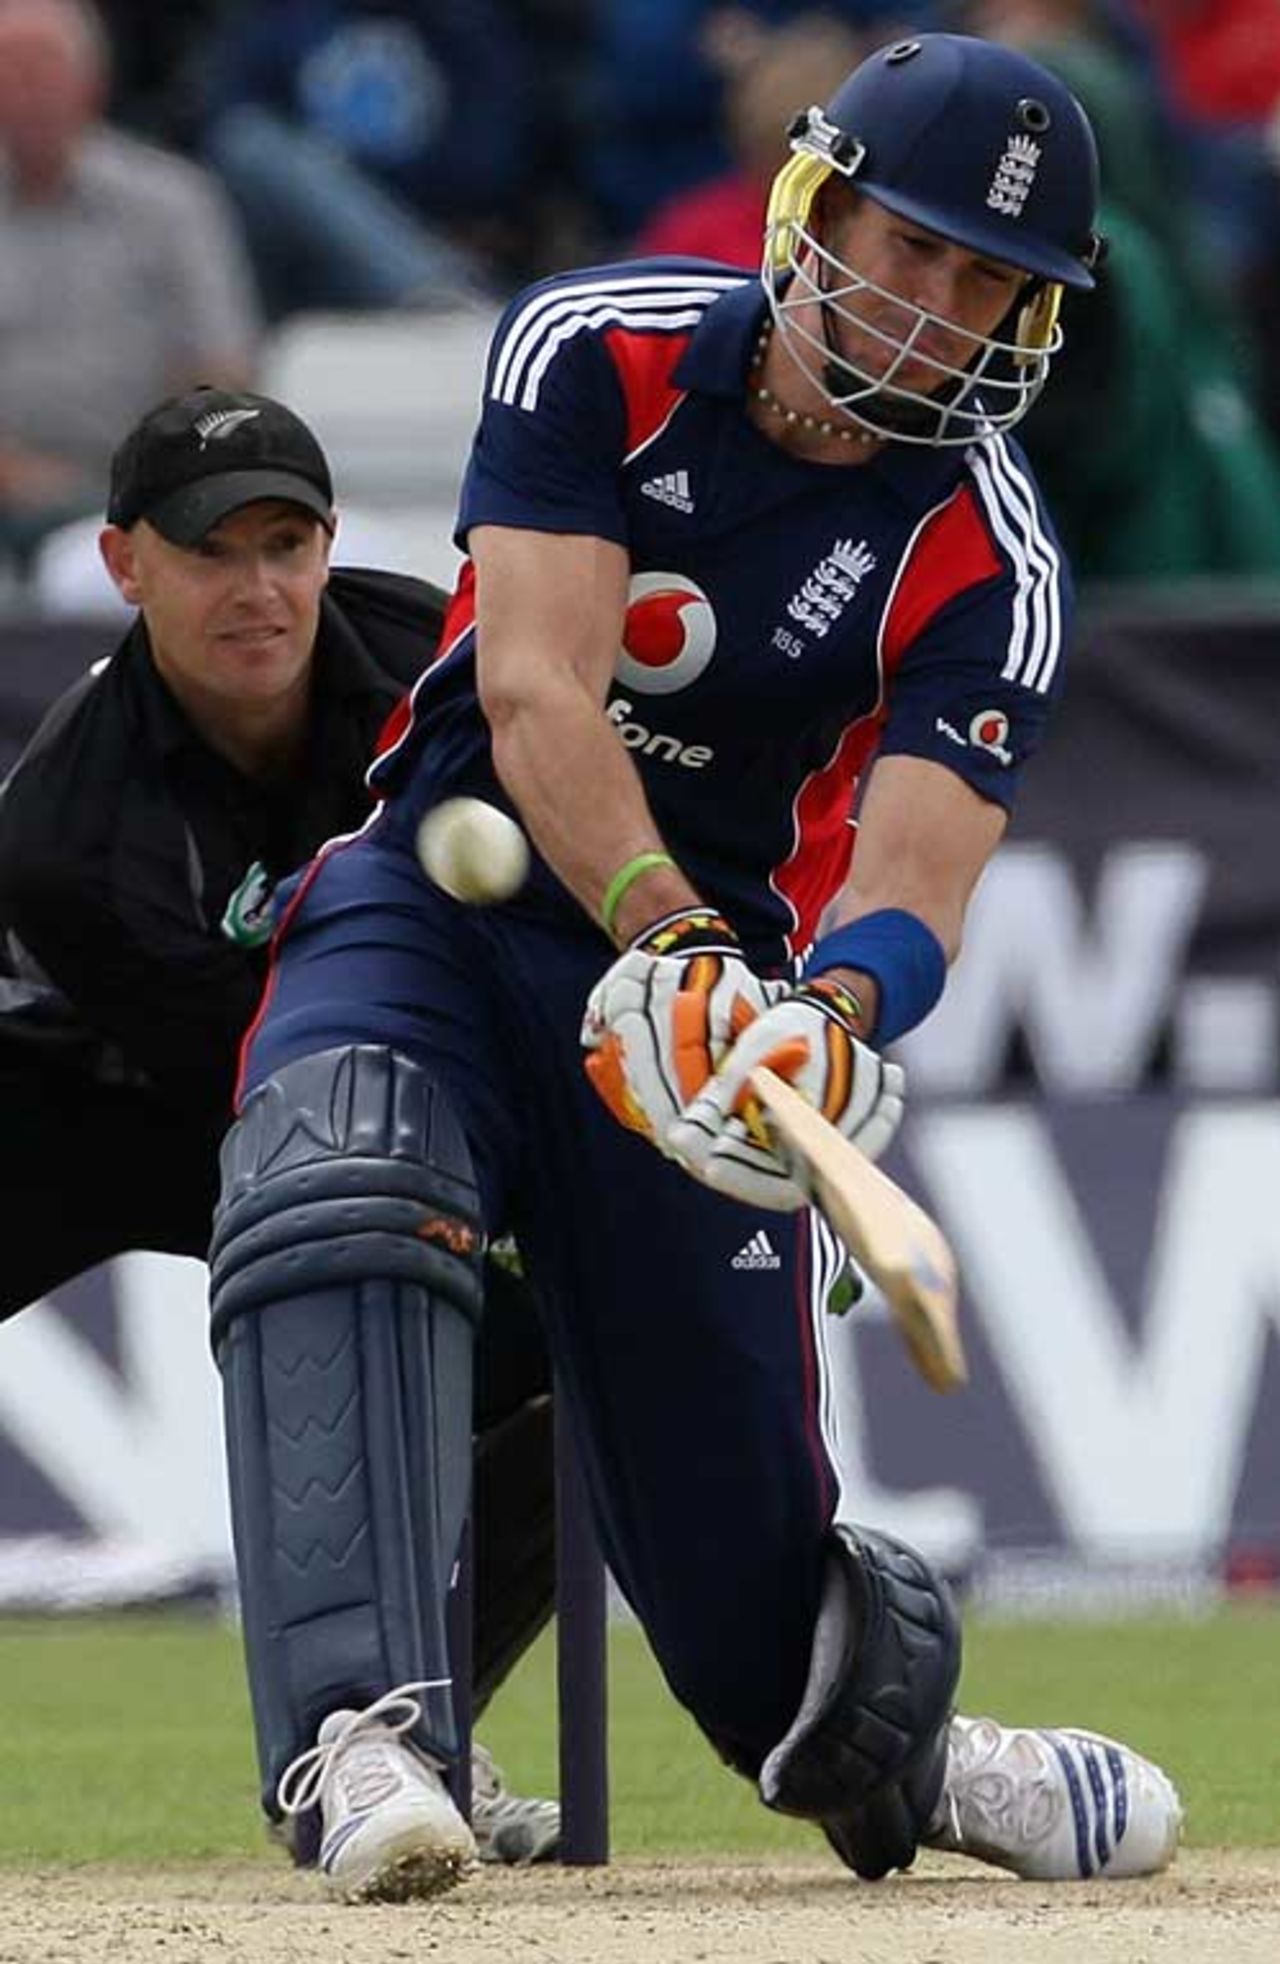 Kevin Pietersen switches to a left hander to launch a huge six, England v New Zealand, 1st ODI, Chester-le-Street, June 15, 2008